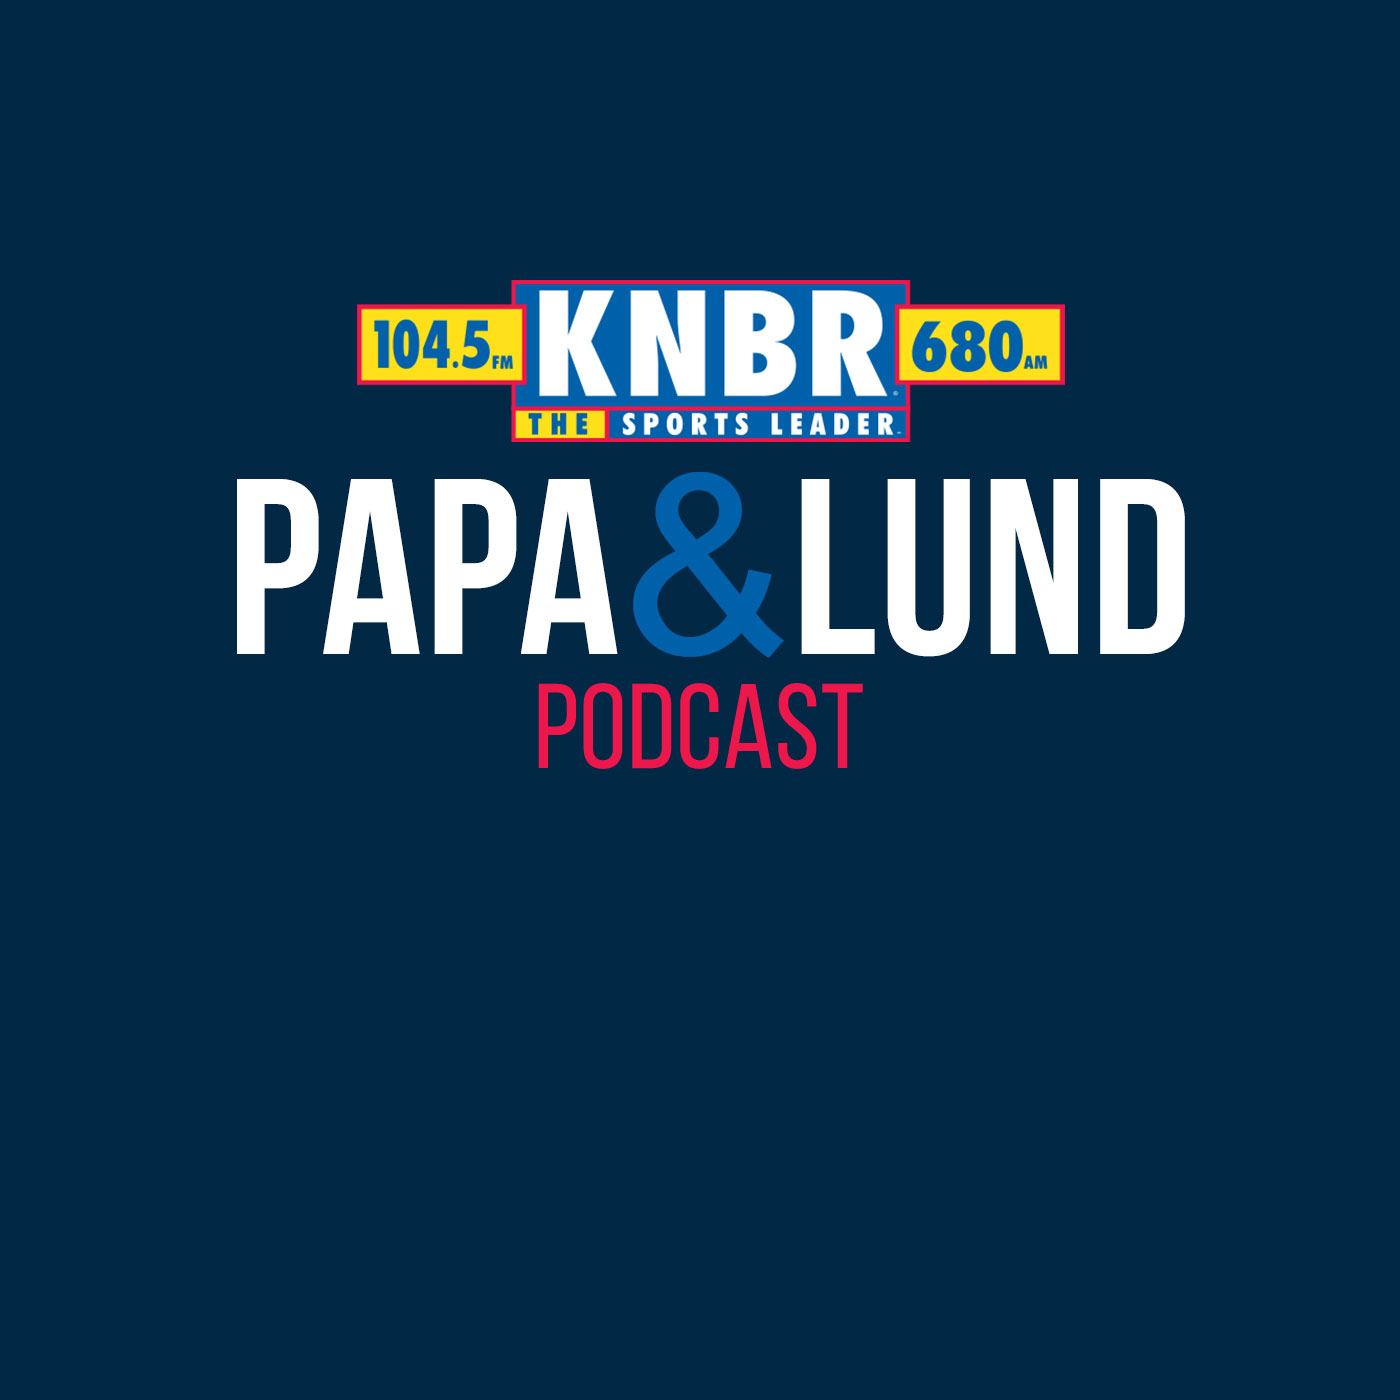 10-22 Rusty Simmons, Golden State Warriors beat writer for the Chronicle joins Papa & Lund